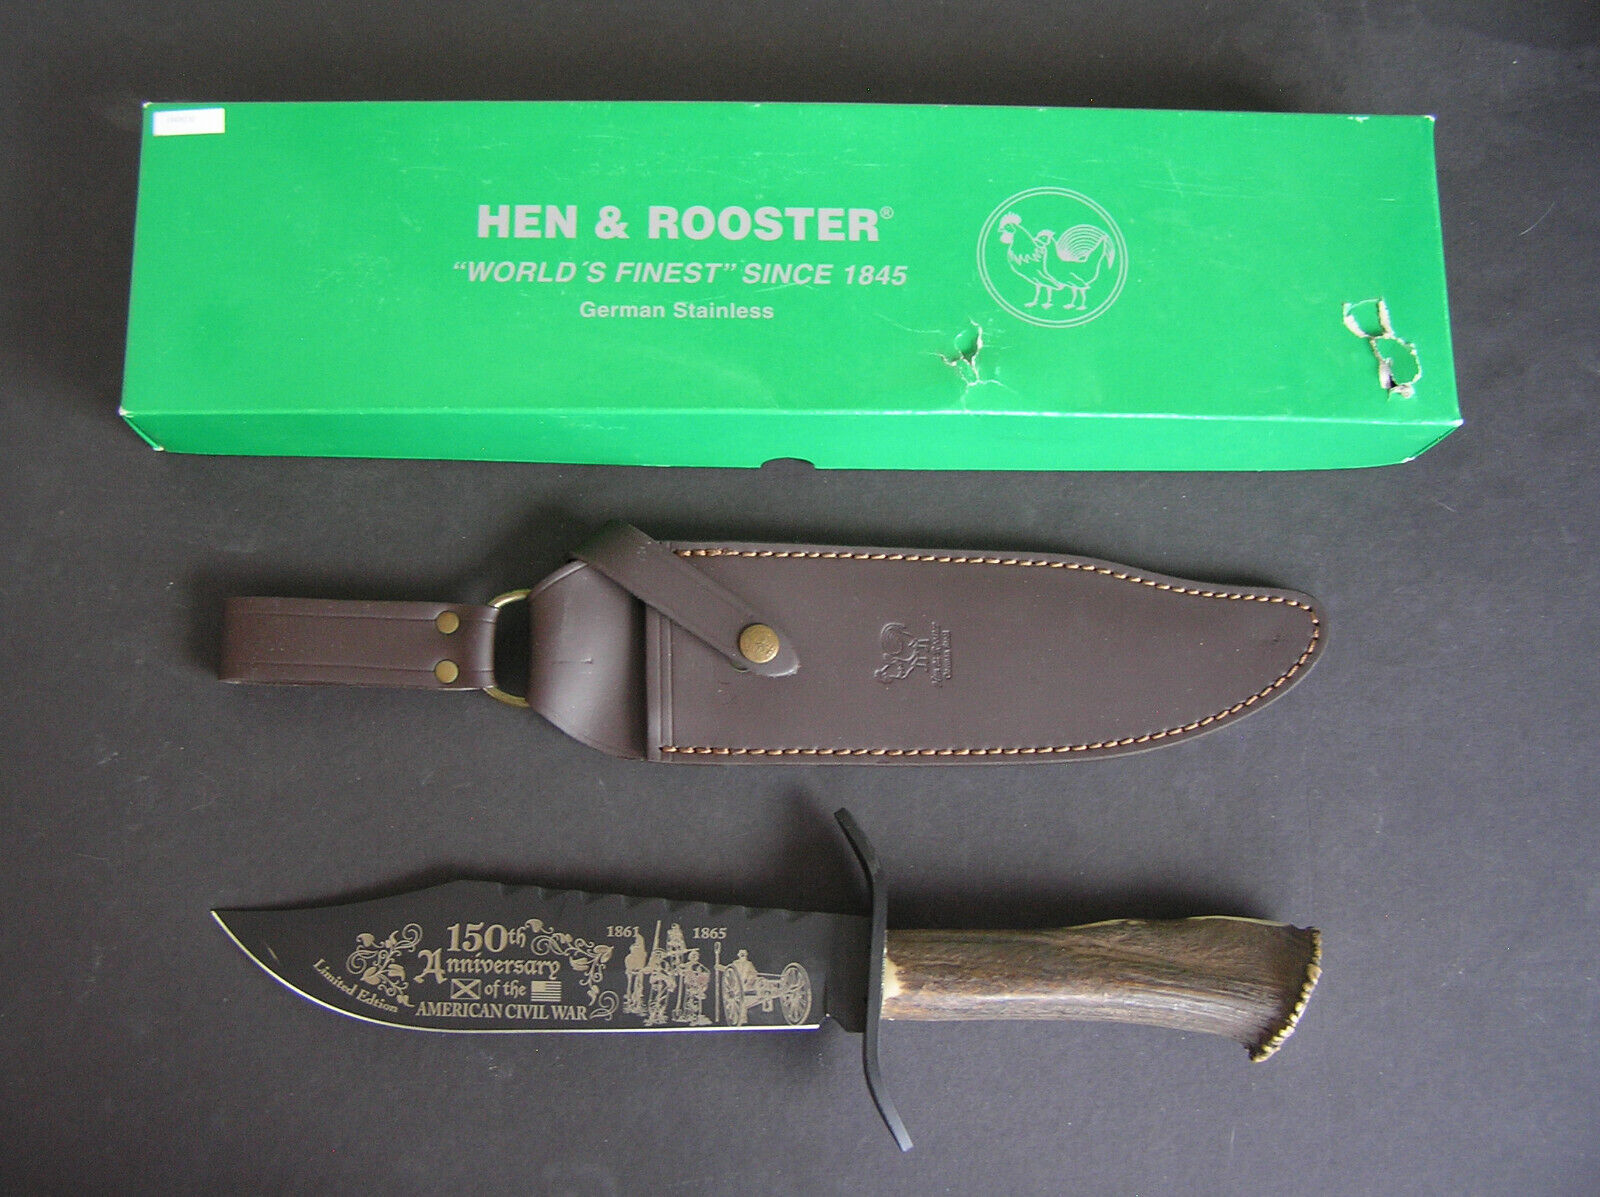 Hen & Rooster Civil War 150th Anniversary Bowie Knife,  1 of 150